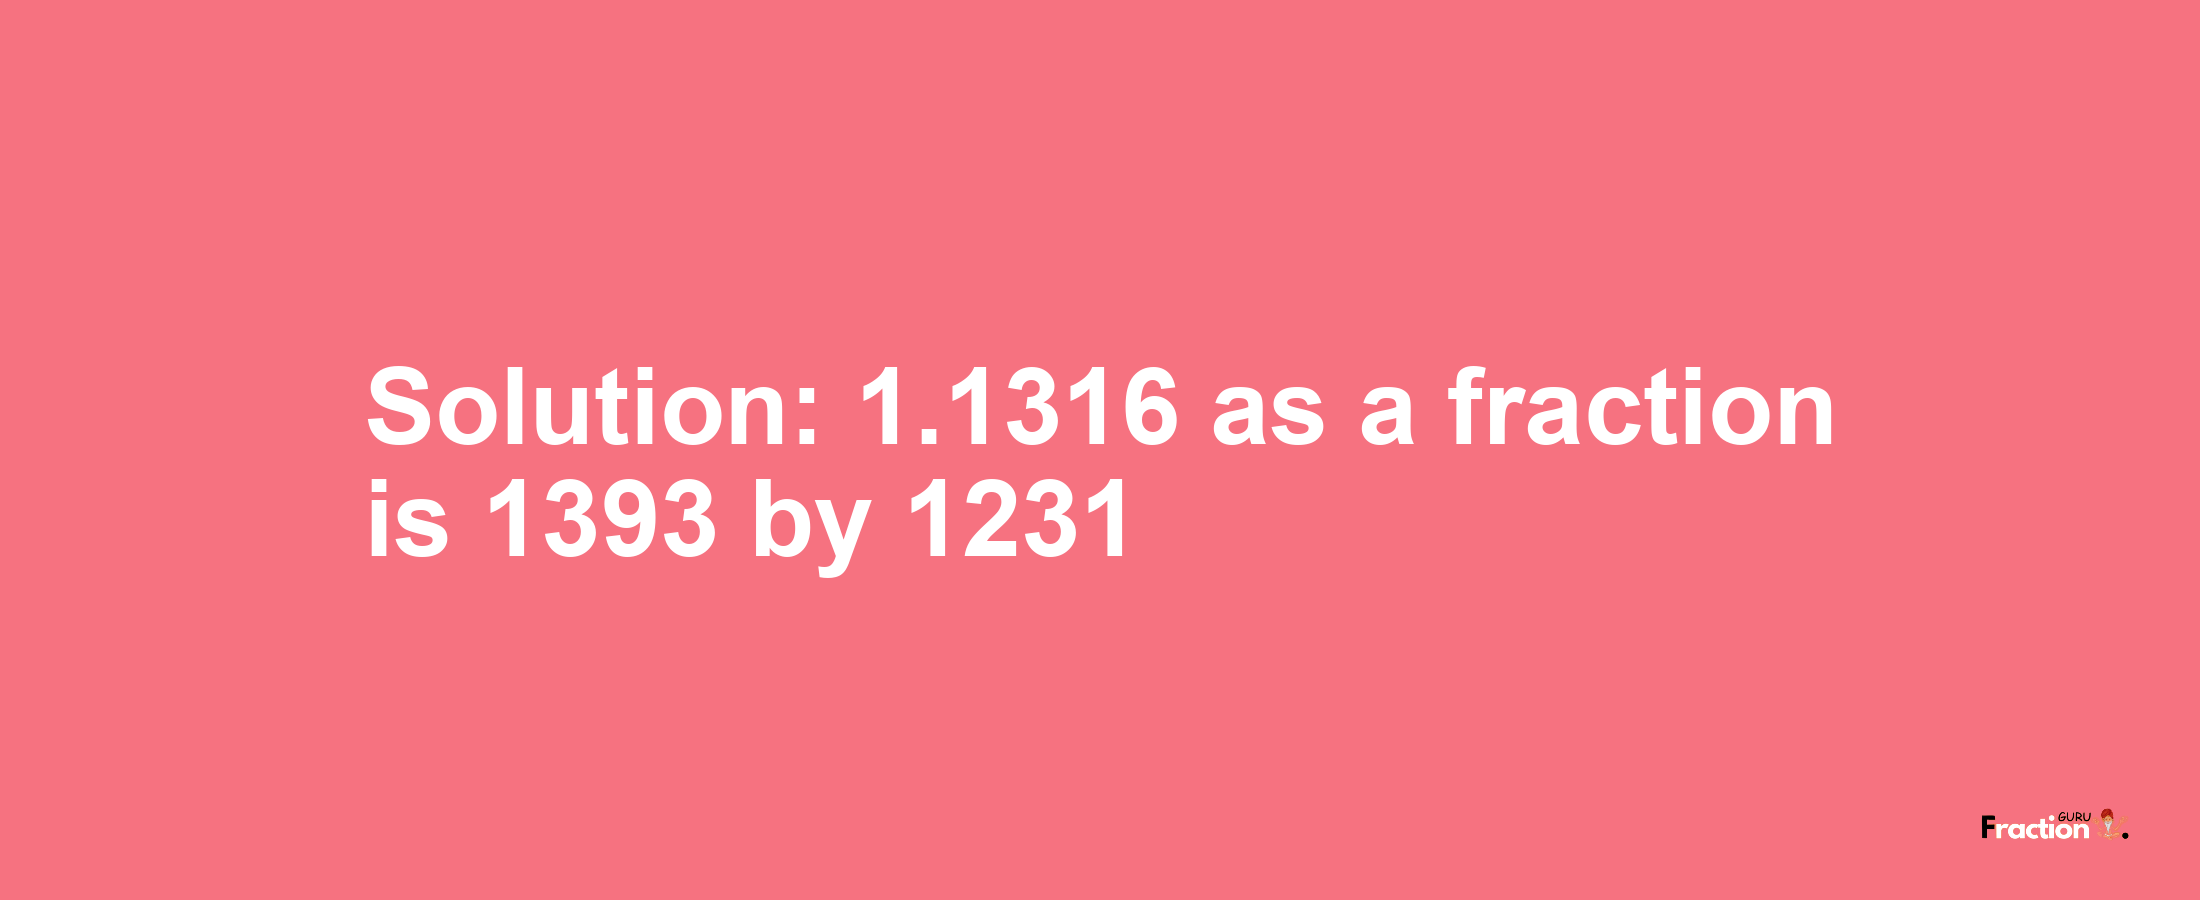 Solution:1.1316 as a fraction is 1393/1231